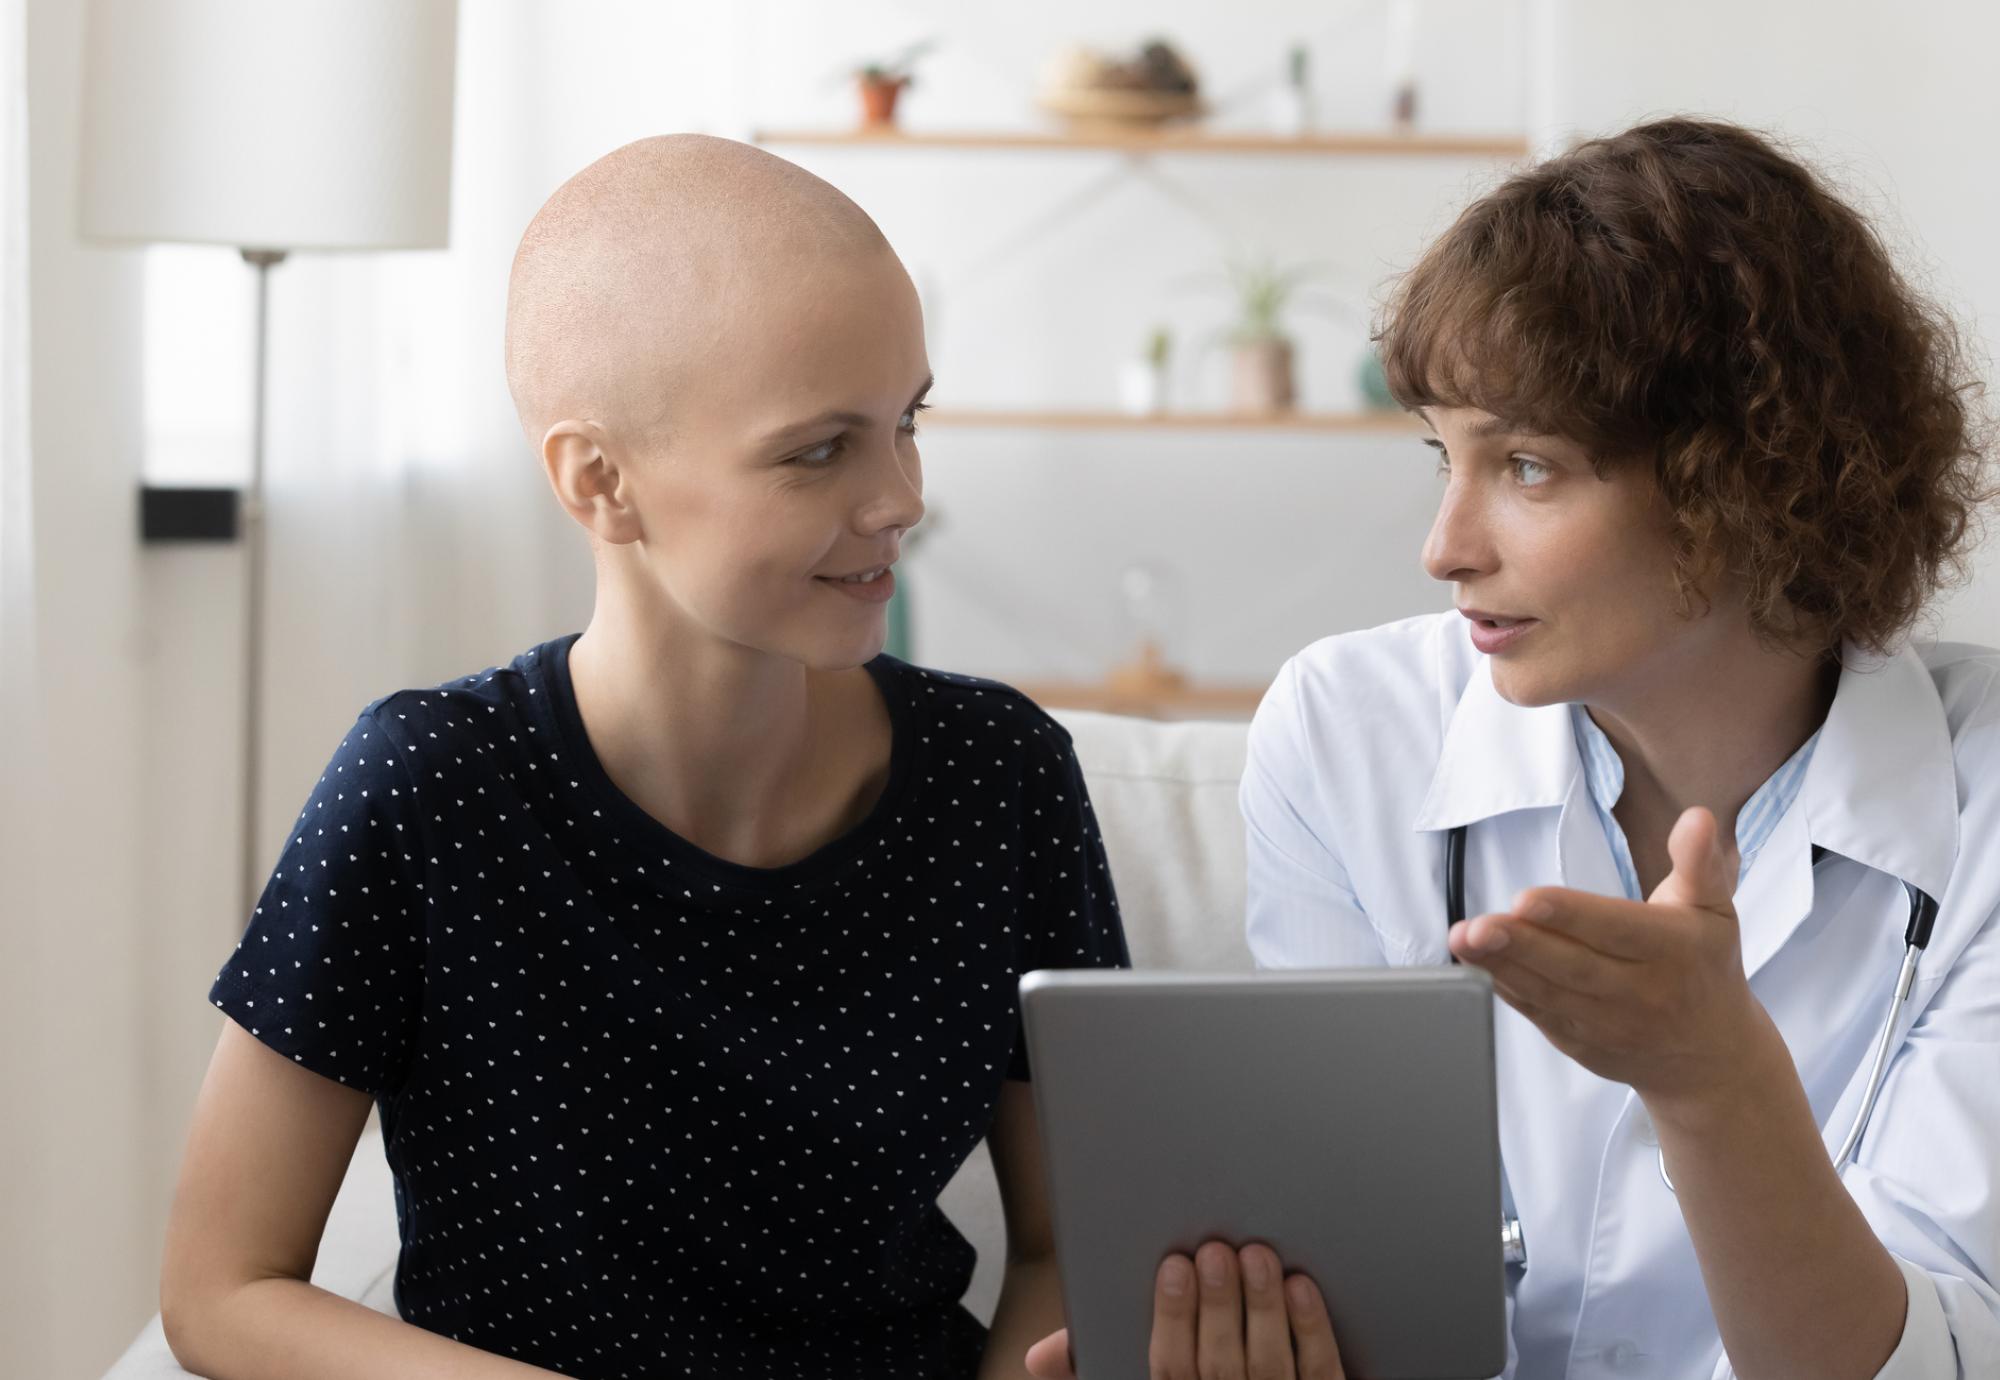 Cancer patient talking with a doctor